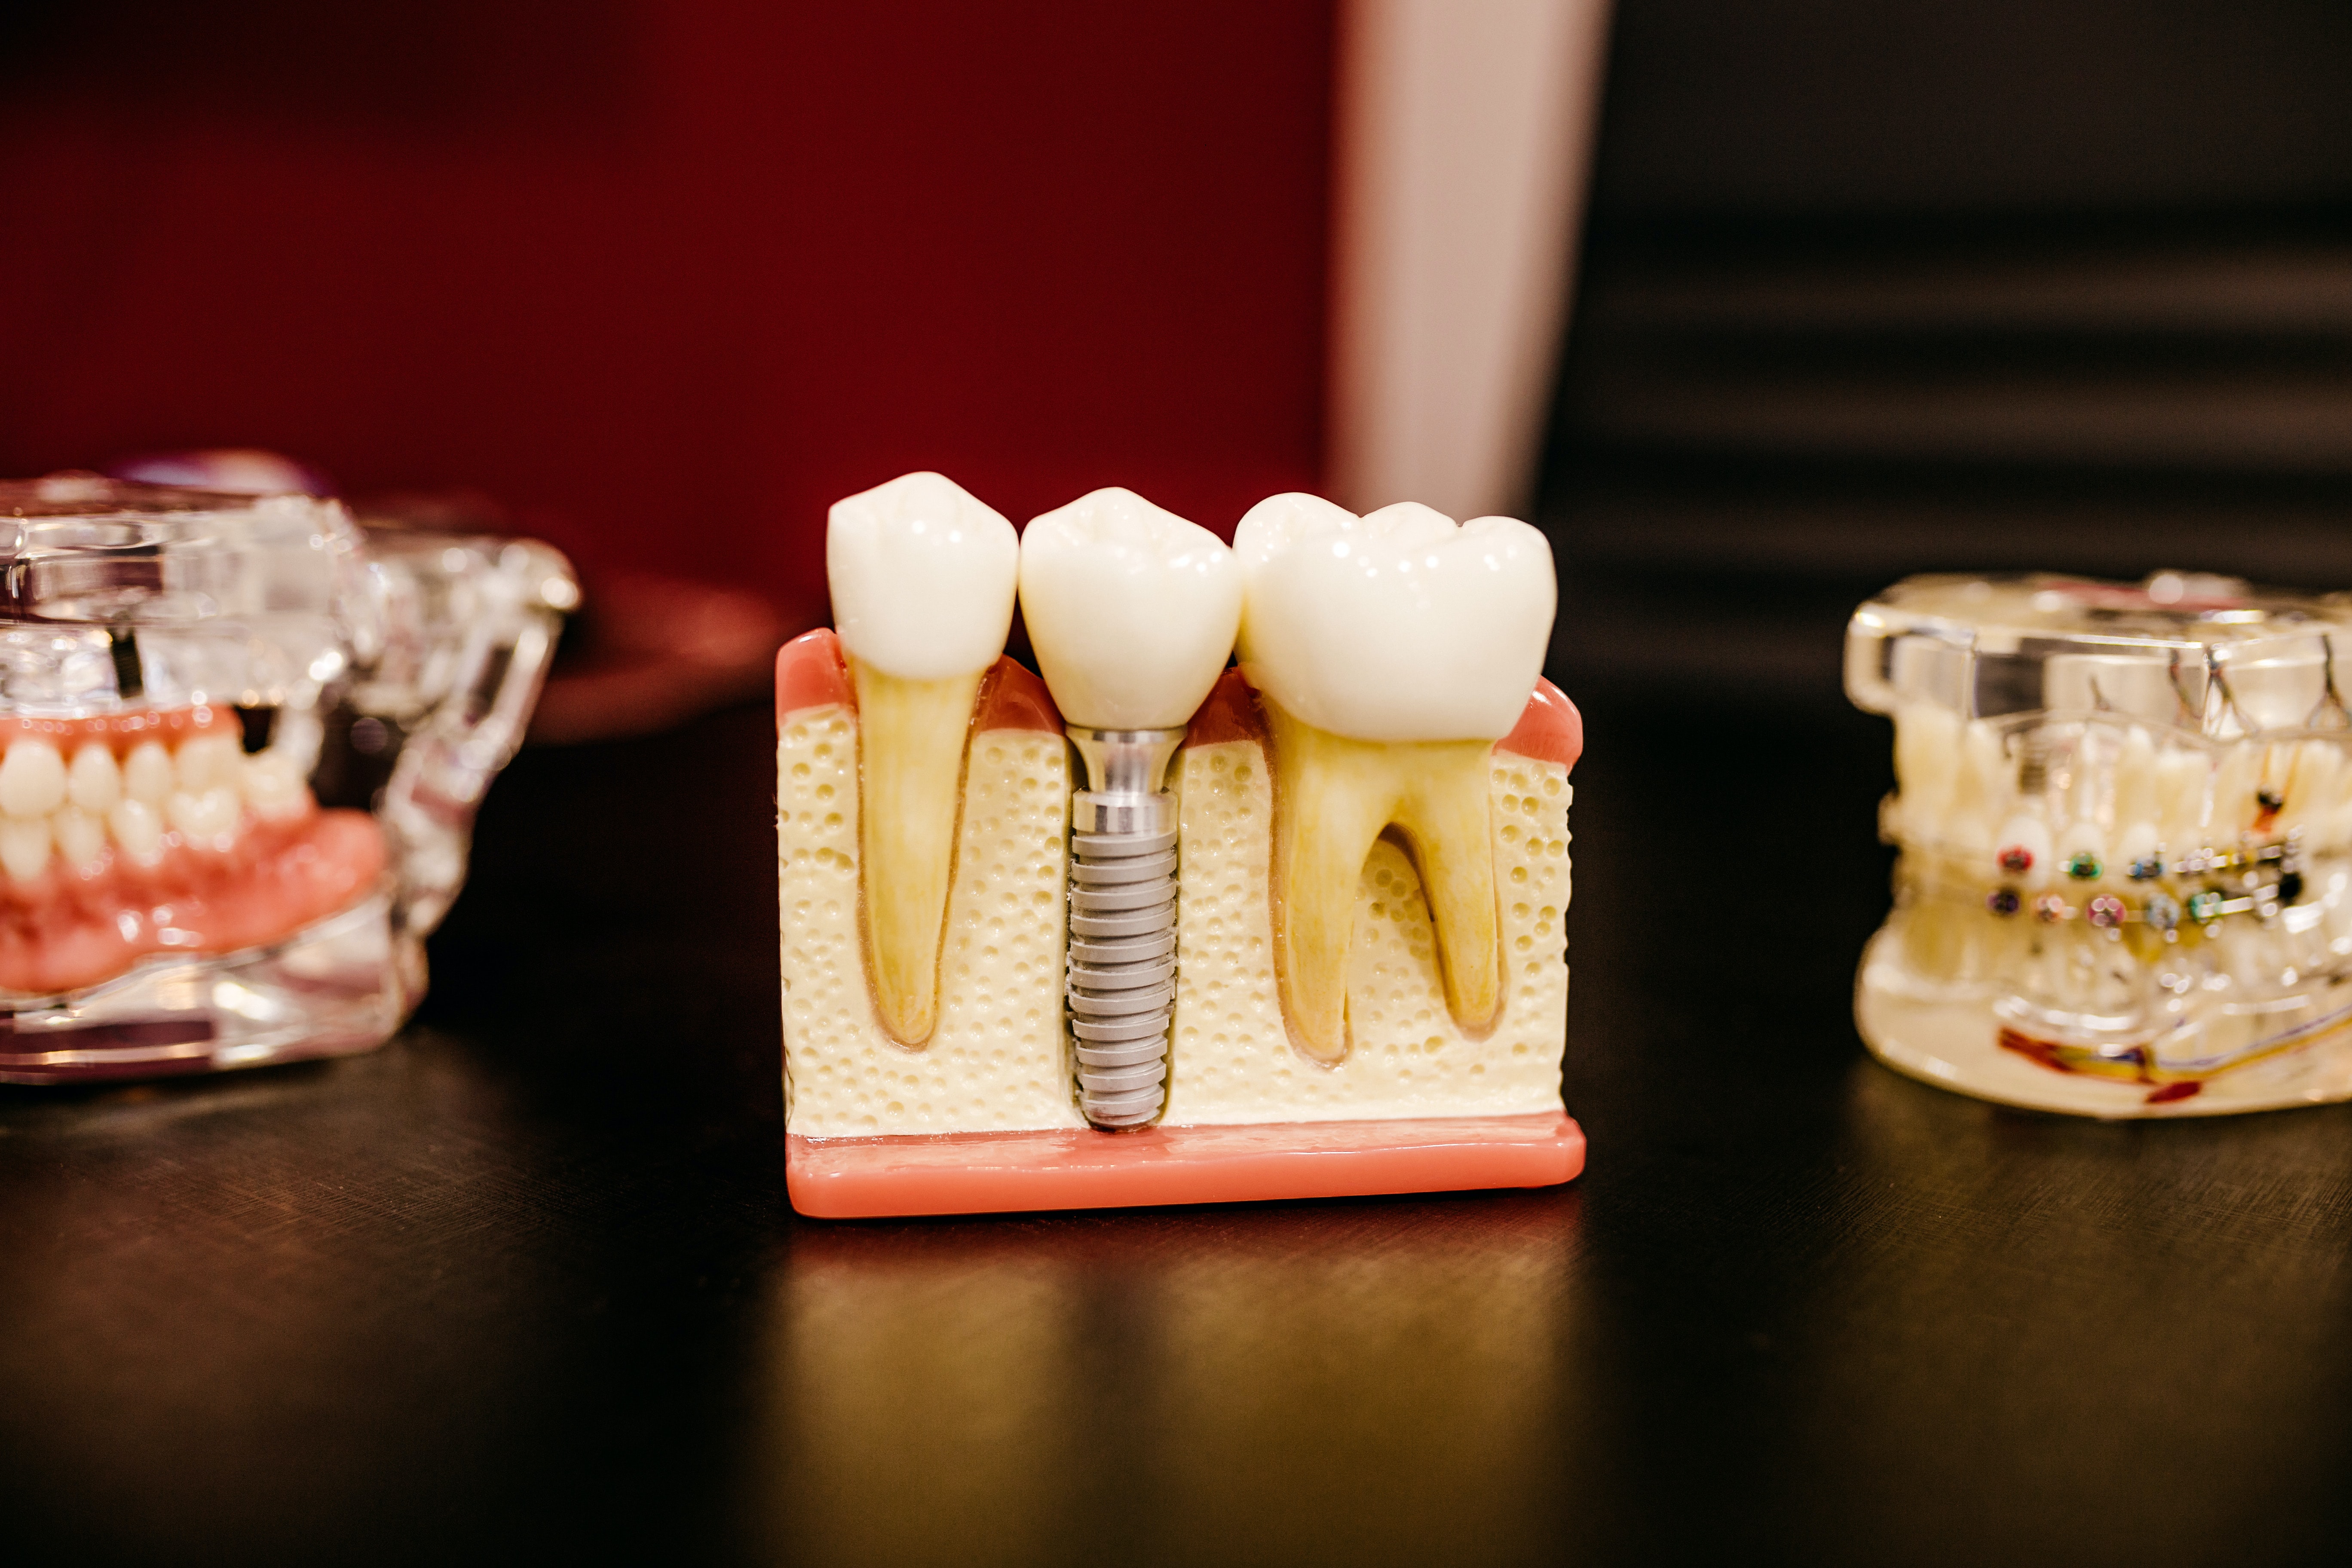 Photograph of Dental Implants jaw model in Harper Woods, MI and West Bloomfield, MI